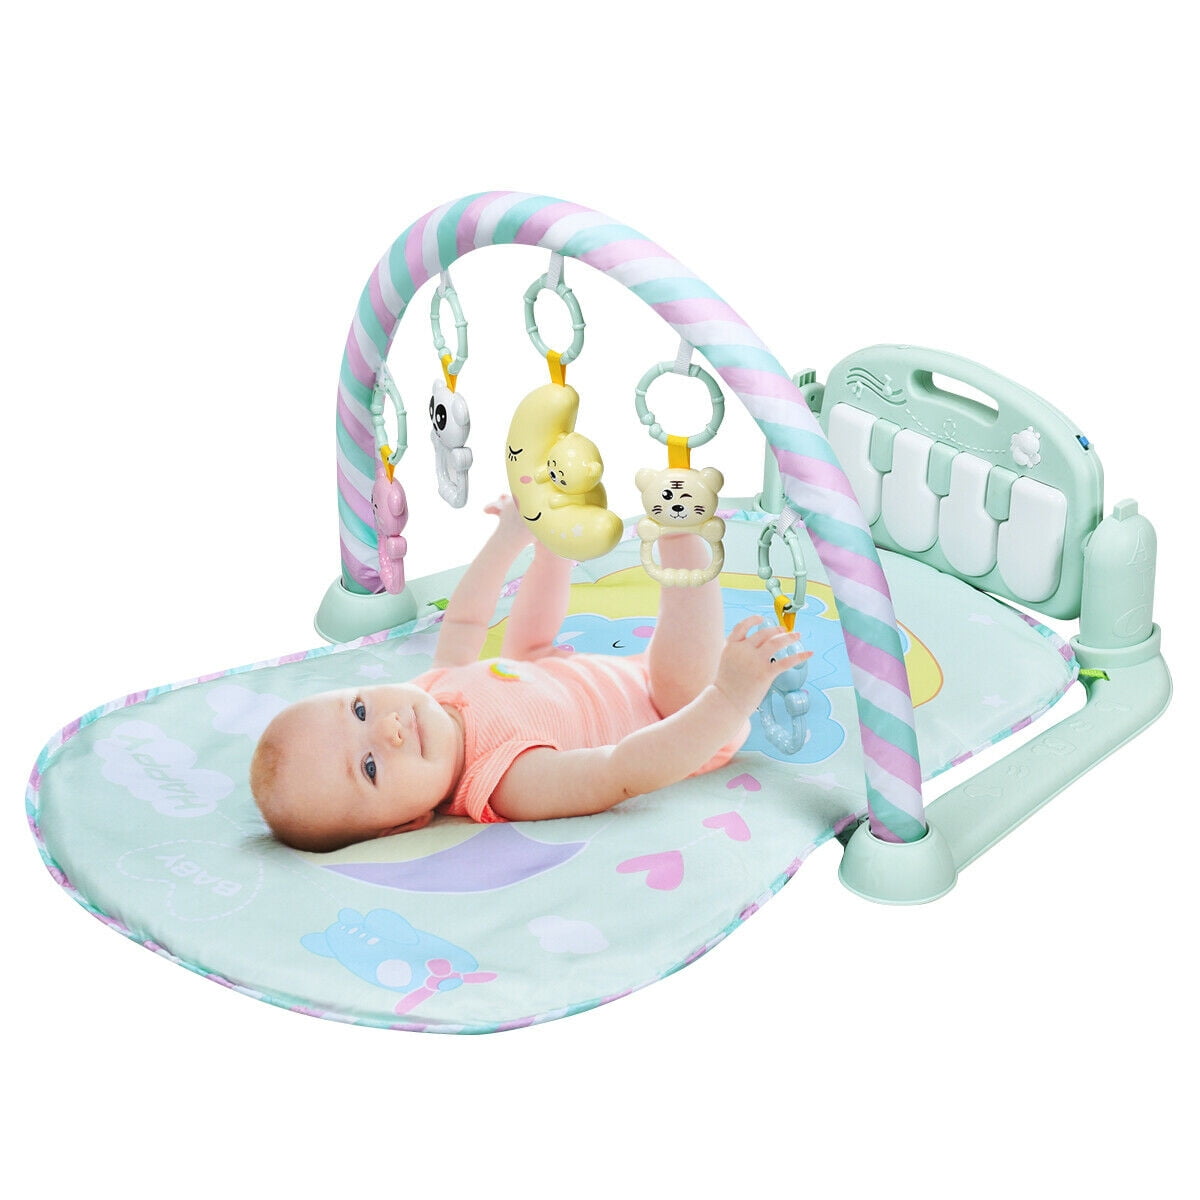 3 in 1 Fitness Baby Gym Play Mat Lay Play Music And Lights Fun Piano Boy Girl UK 